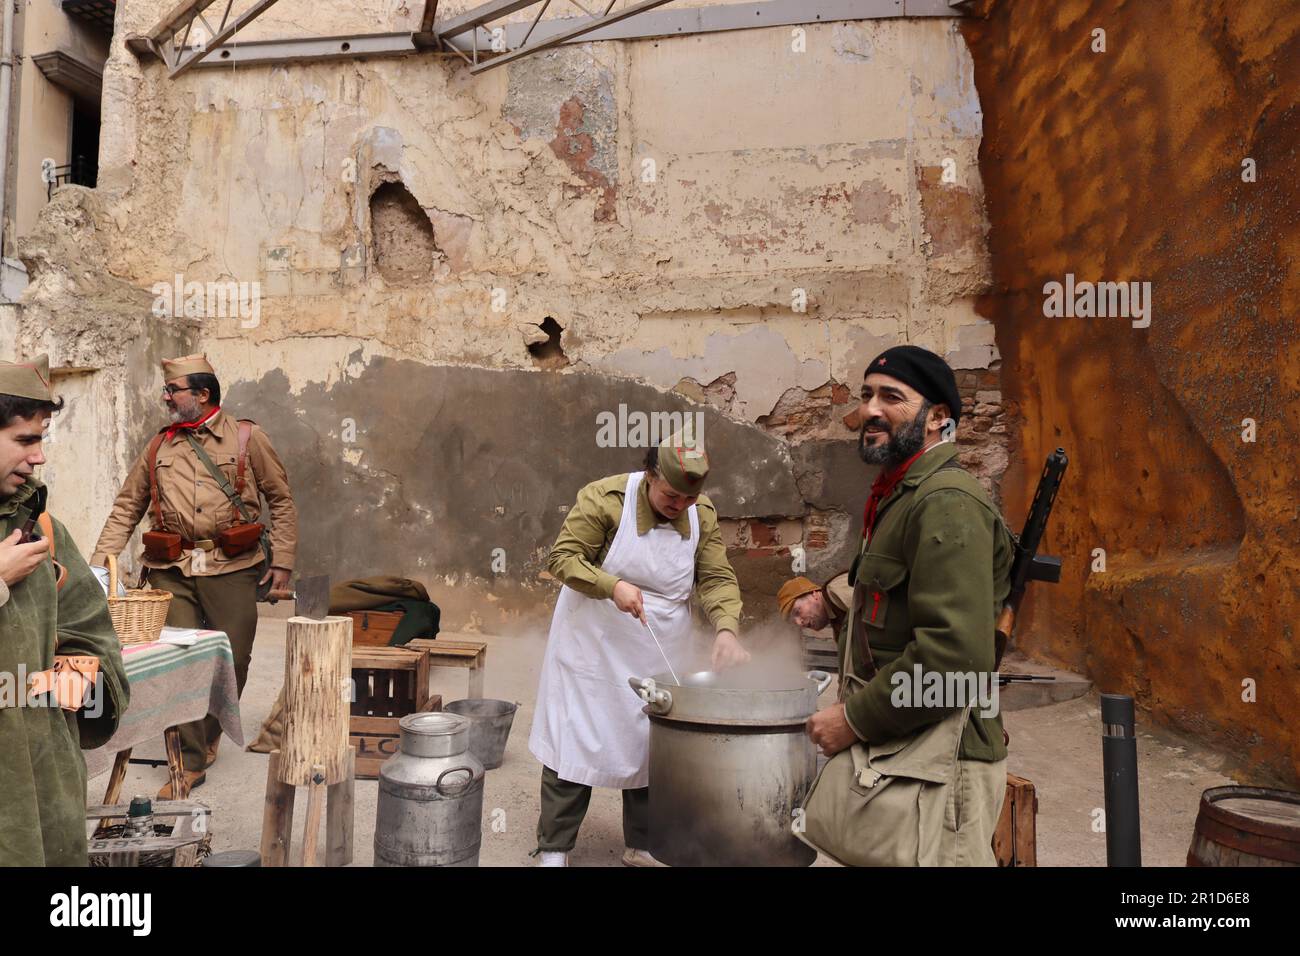 Spanish Civil War reenactment. Living historians recreate a kitchen at the rearguard, with cooks and soldiers. Hunger in war was lethal. Stock Photo